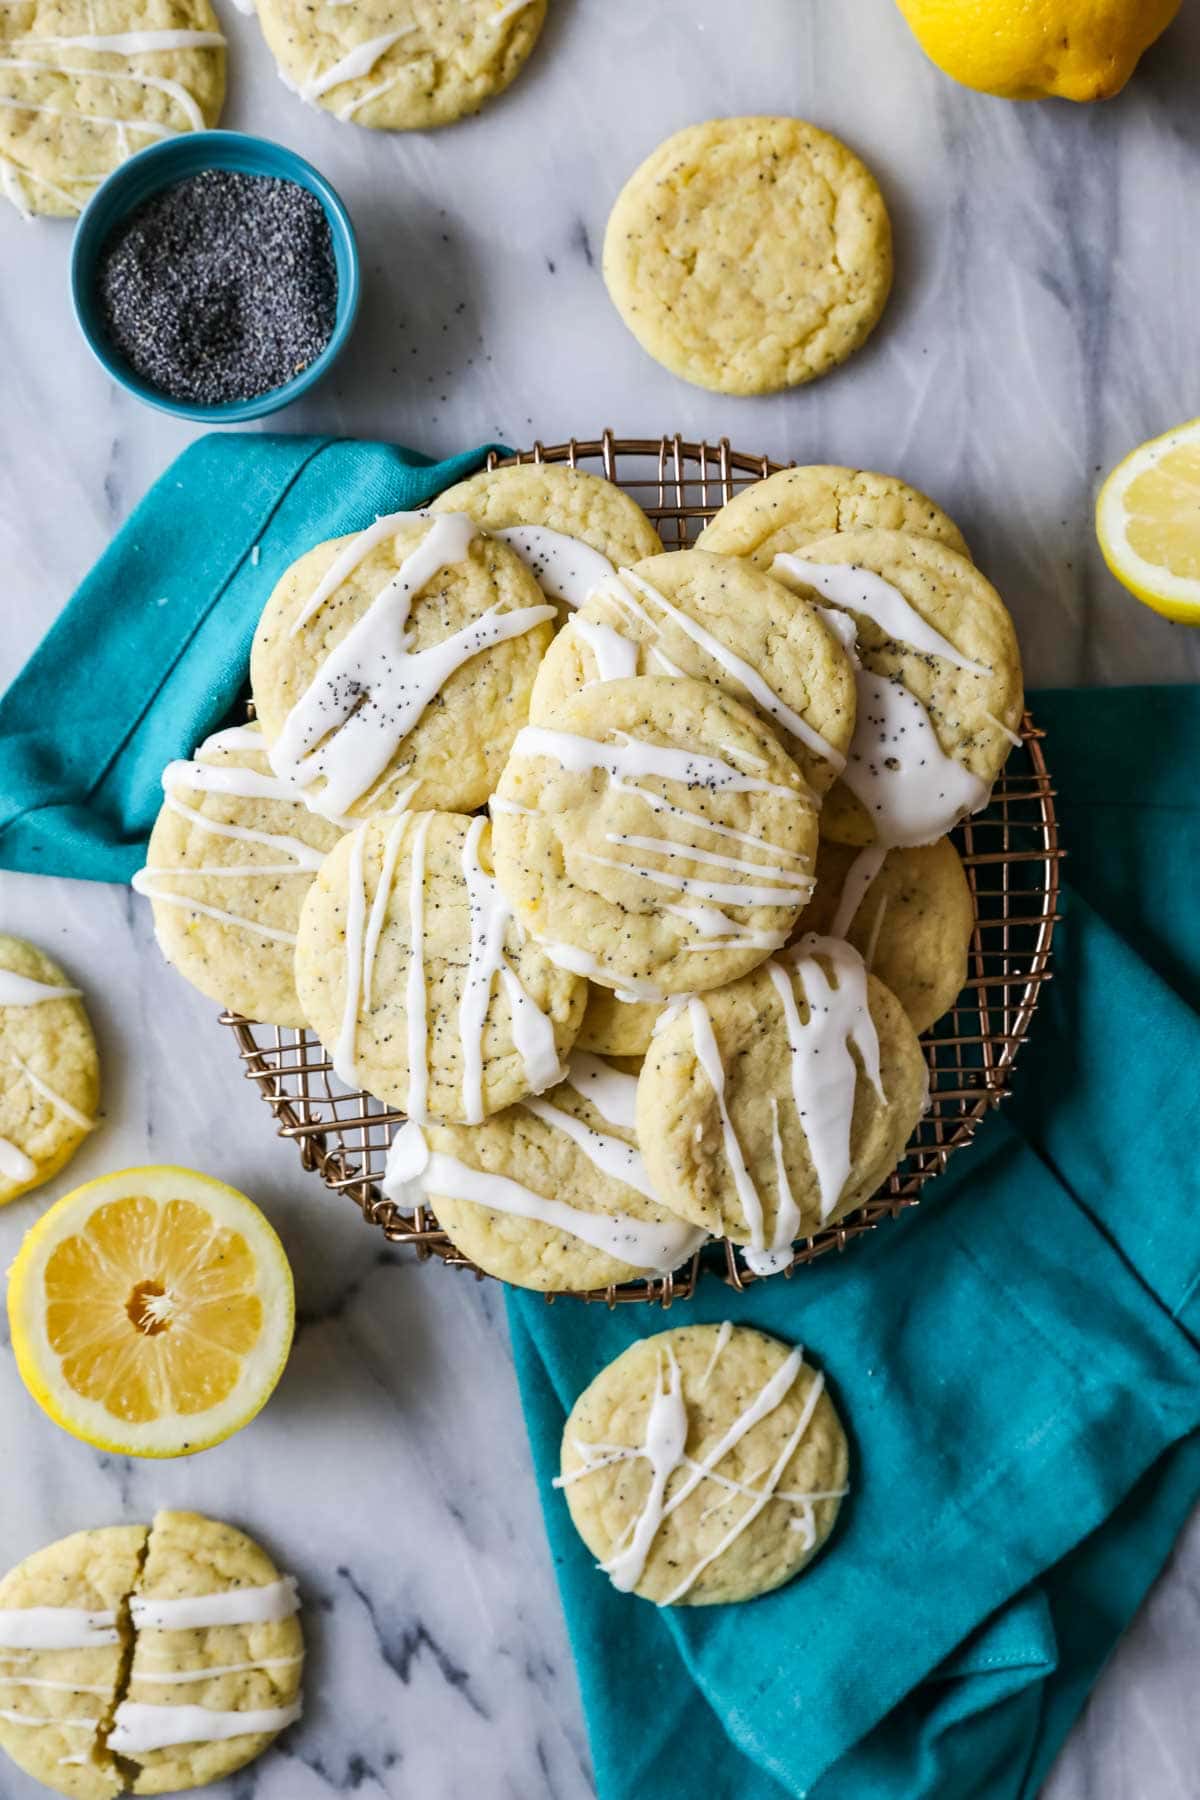 Overhead view of a pile of lemon cookies drizzled with glaze.